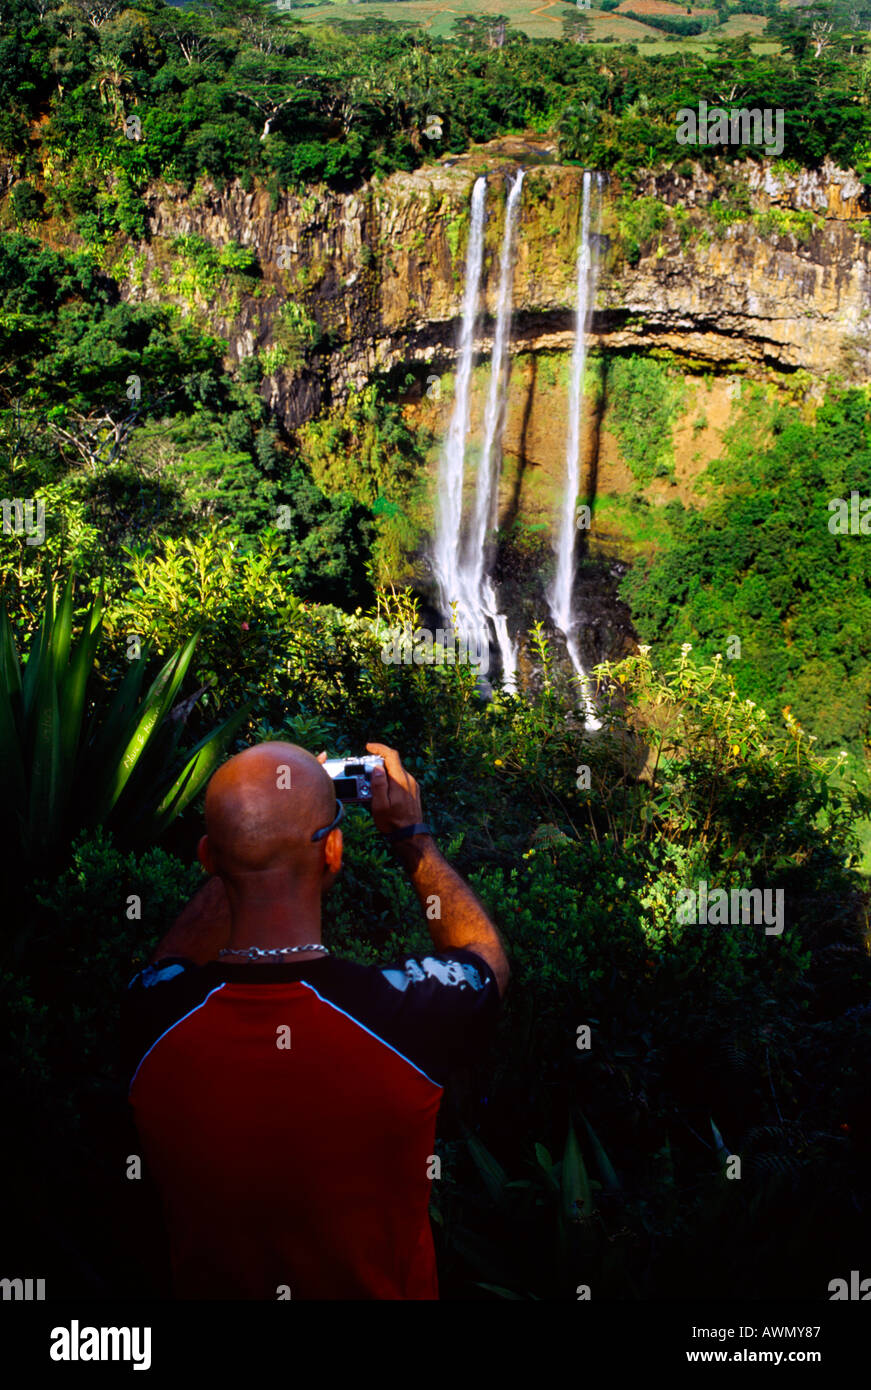 Chamarel Waterfall Mauritius Bald Headed Man taking Photograph with Digital Camera- falls formed by River St Denis and surrounded by Vegetation of Stock Photo